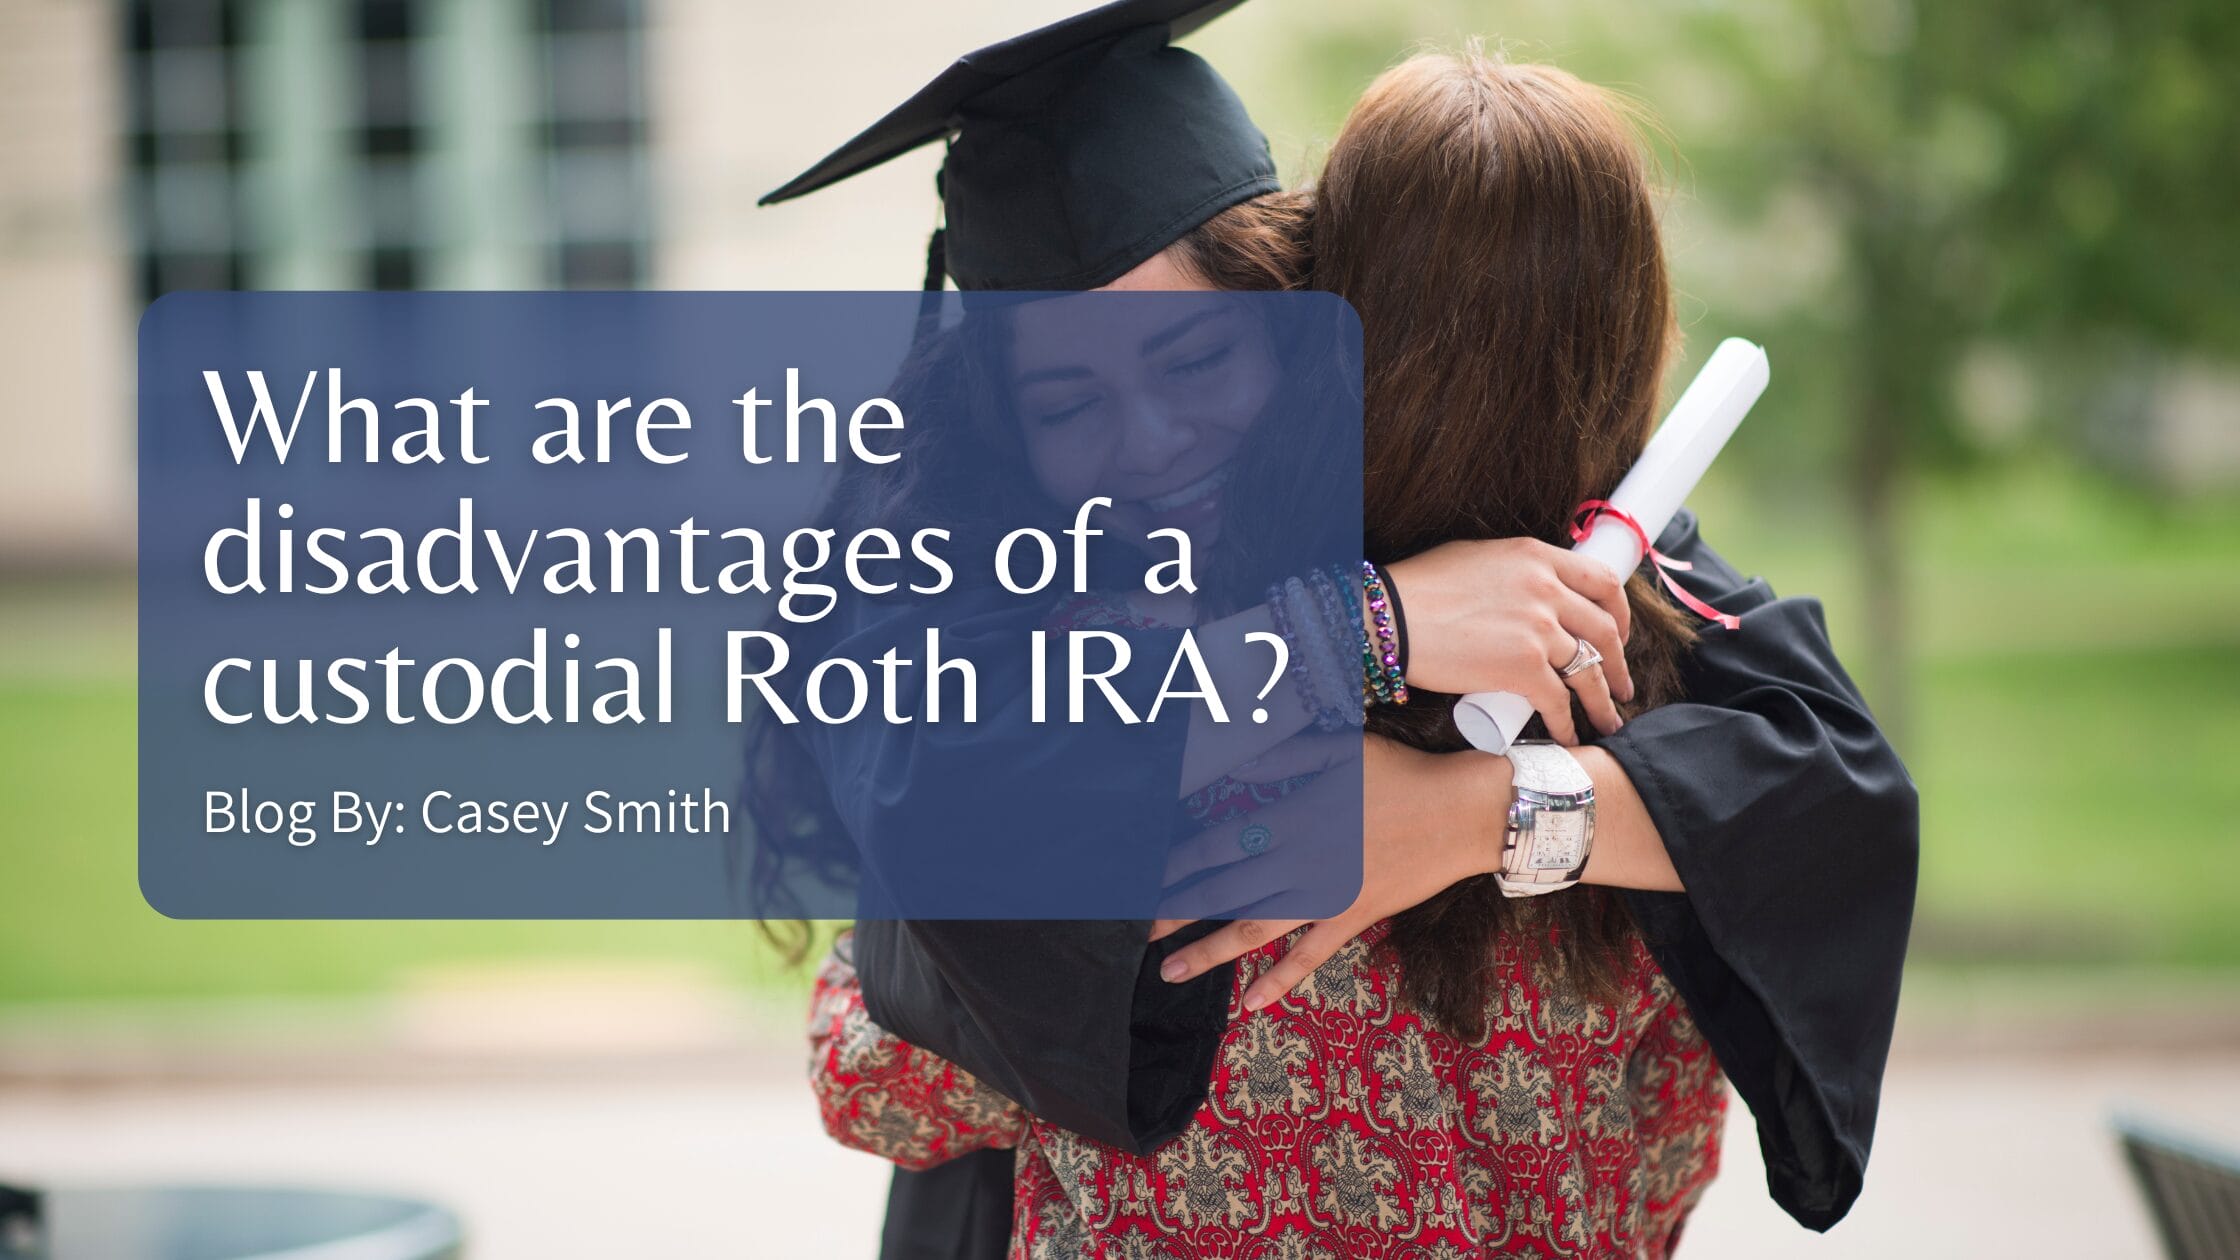 What are the disadvantages of a custodial Roth IRA?